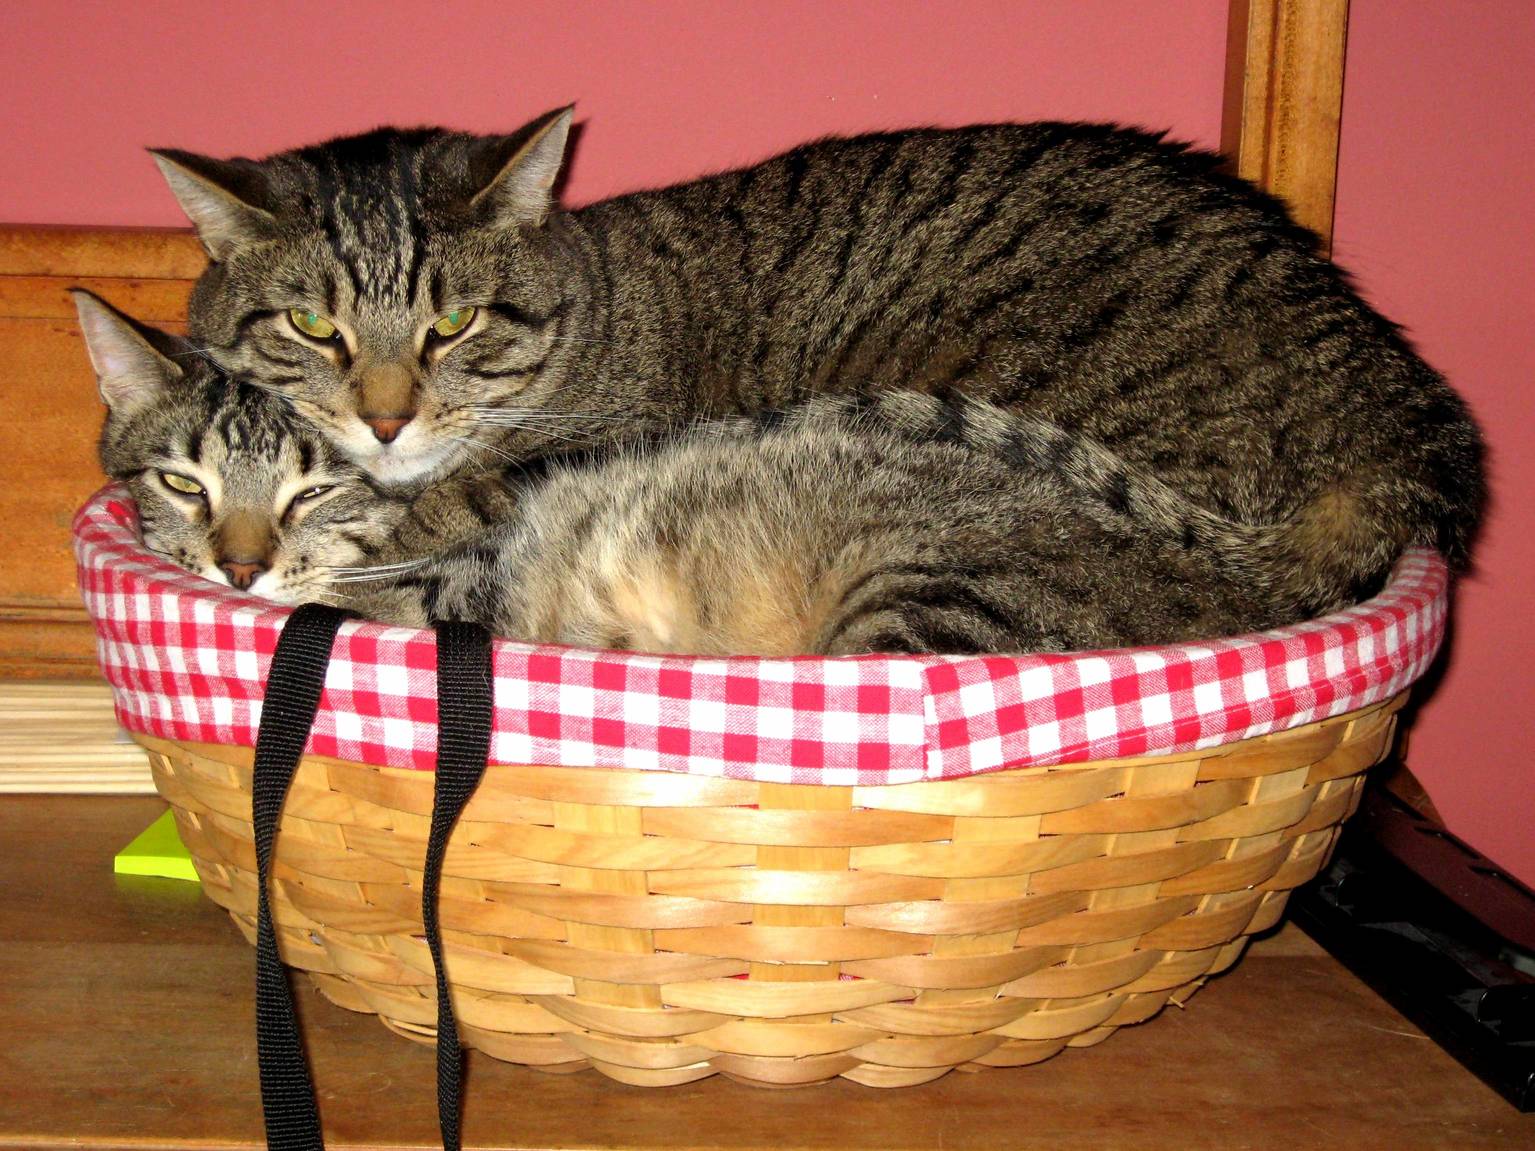 I dont think they quite fit in this basket.